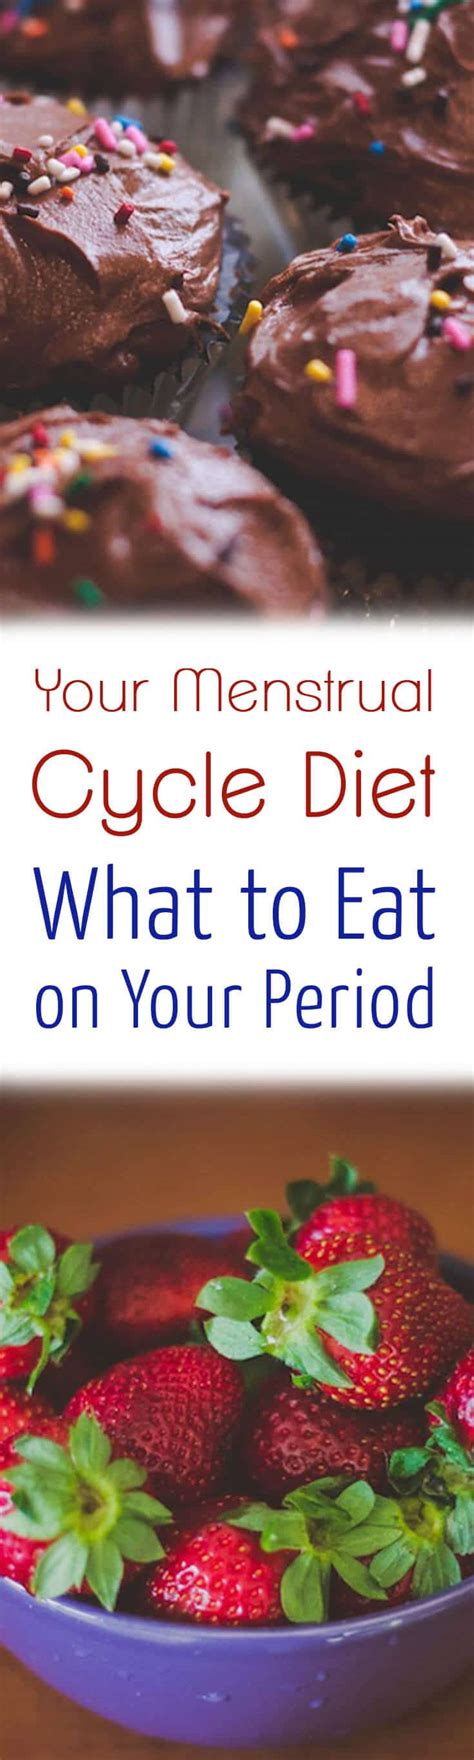 your menstrual cycle diet what to eat on your period abbey s kitchen